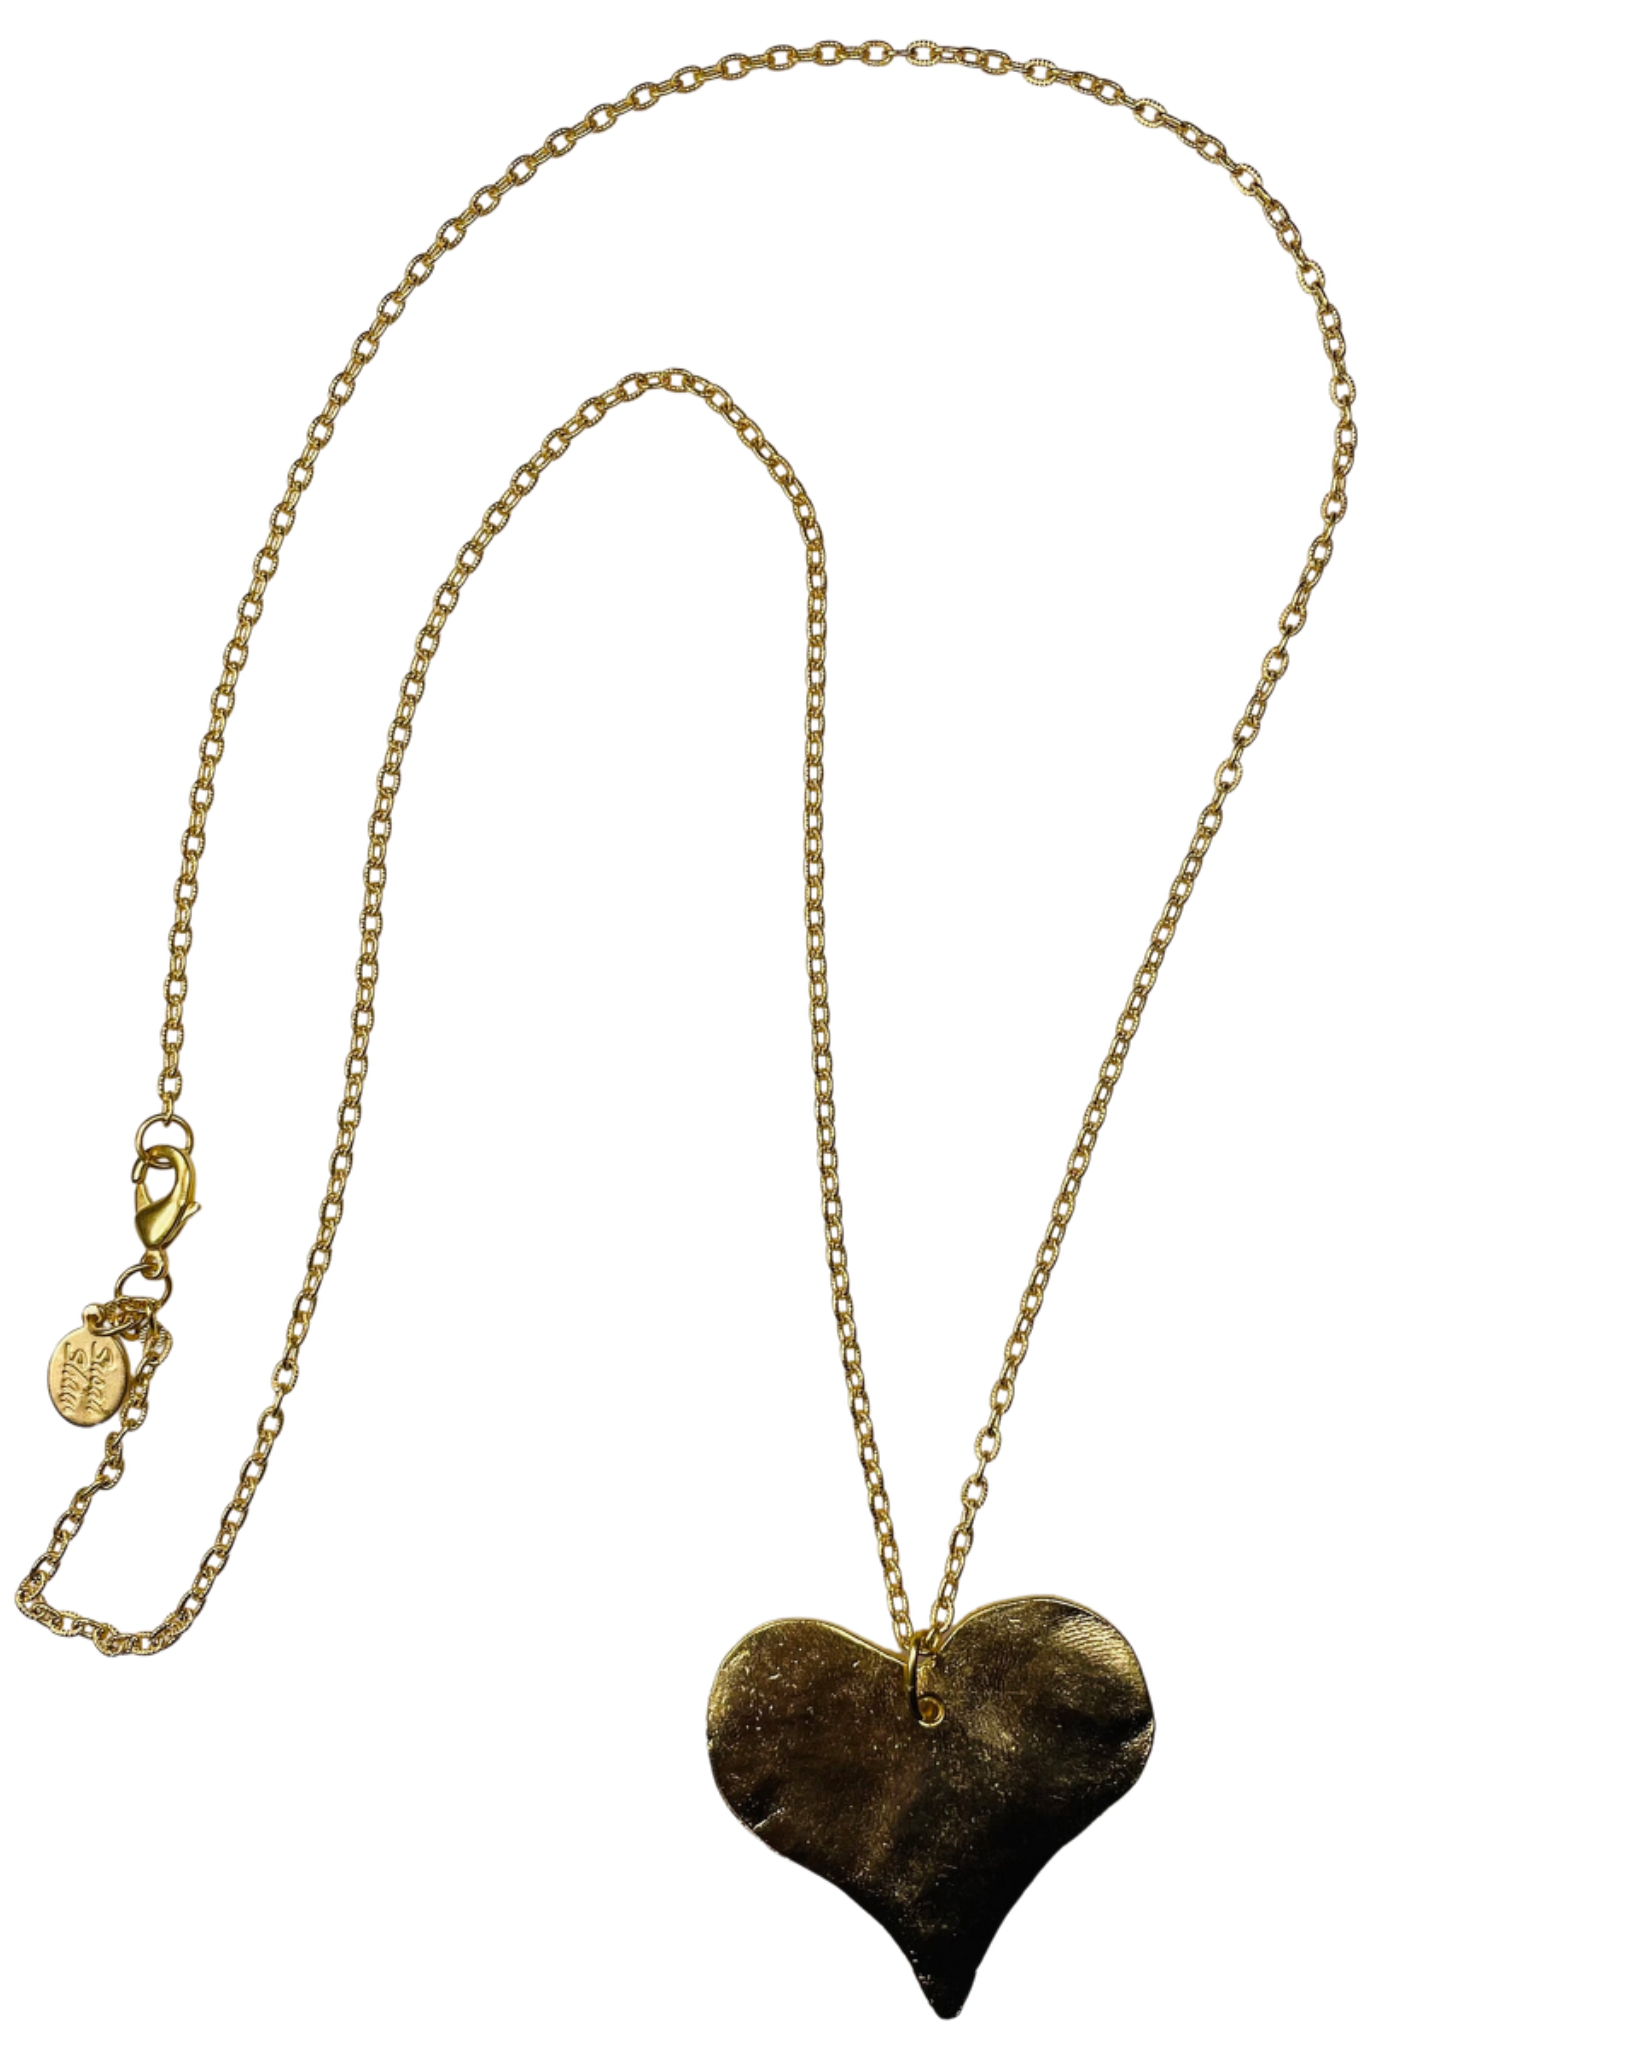 Susan Shawn Gold Heart Chain Necklace.